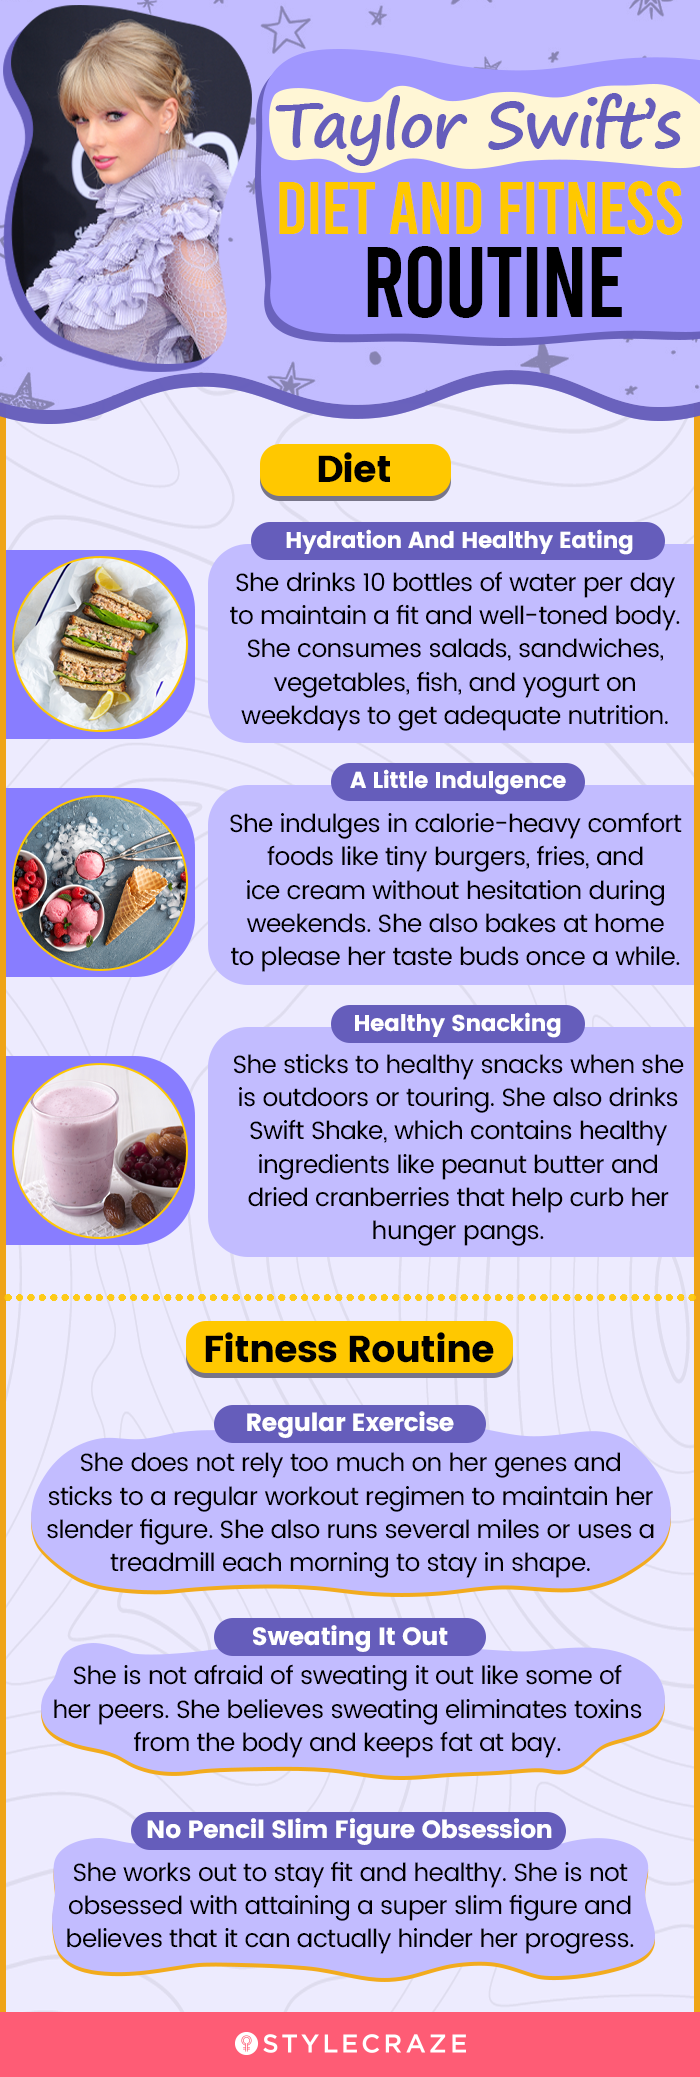 taylor swift’s diet and fitness routine (infographic)